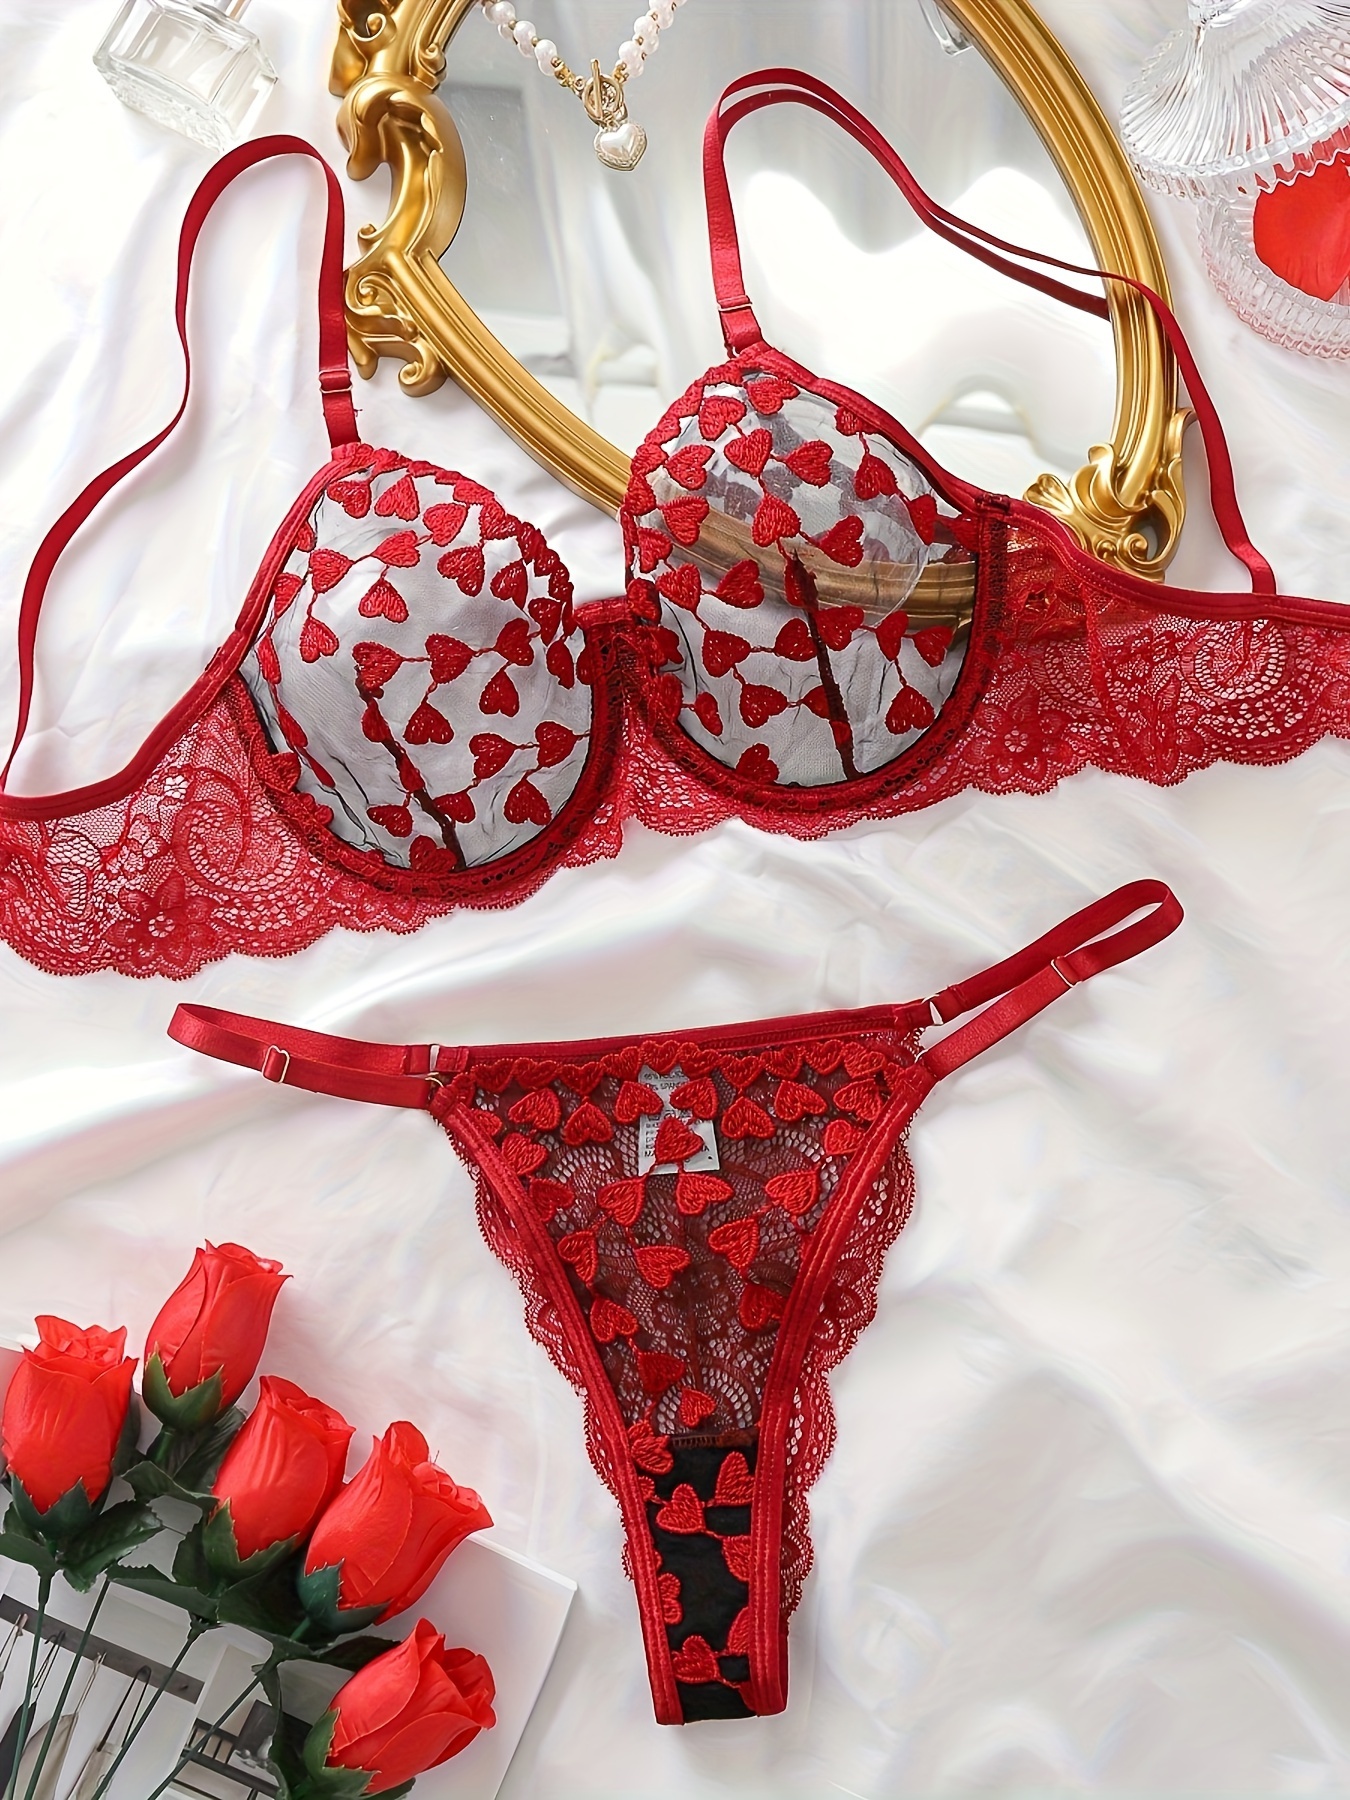 Heart Embroidery Lingerie Set Mesh Unlined Bra Strappy Thong